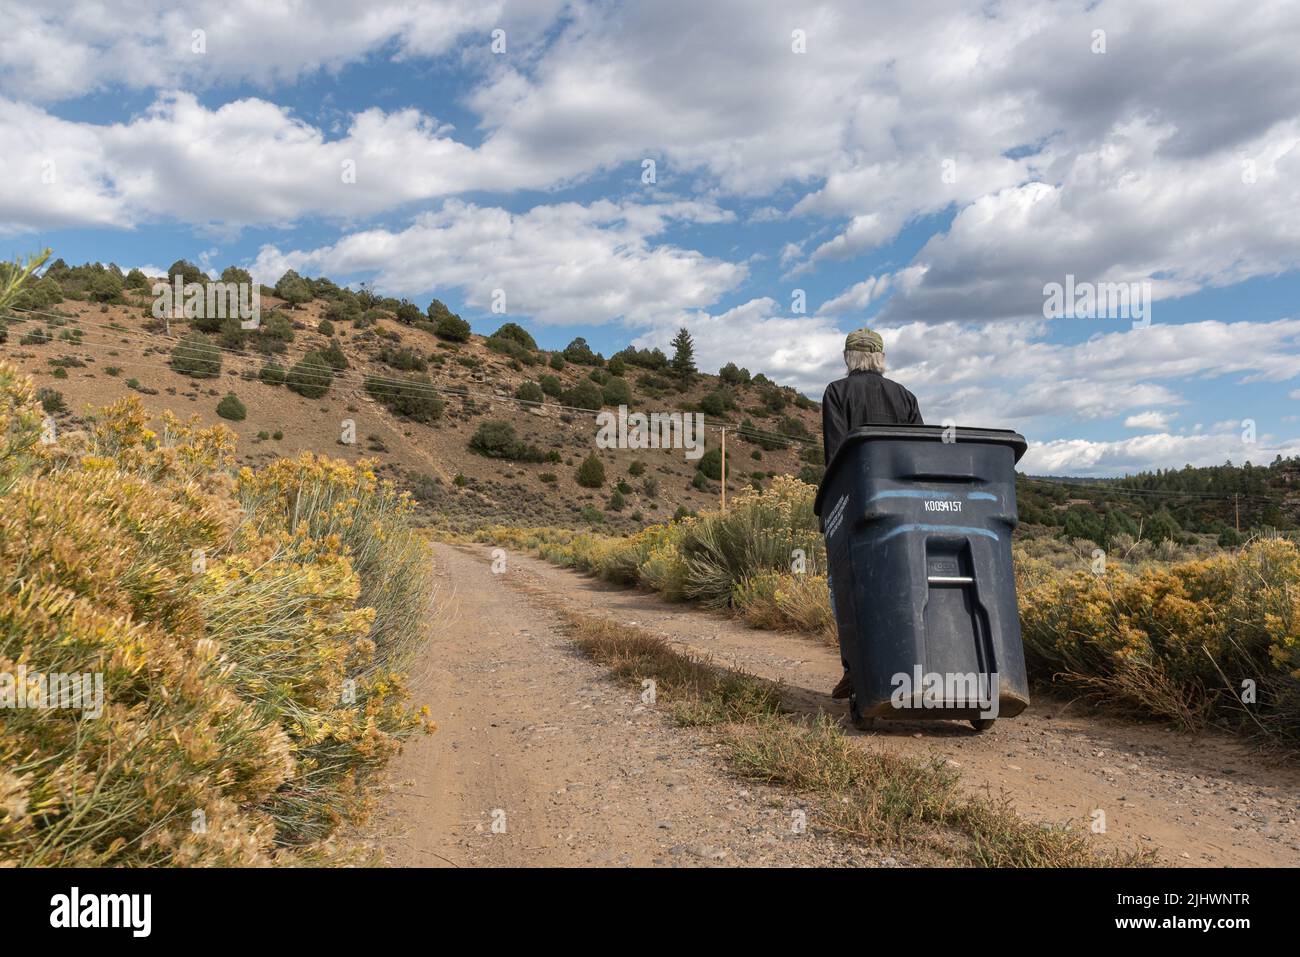 https://c8.alamy.com/comp/2JHWNTR/a-man-rolls-a-large-black-garbage-can-down-a-gravel-road-in-rural-new-mexico-united-states-2JHWNTR.jpg